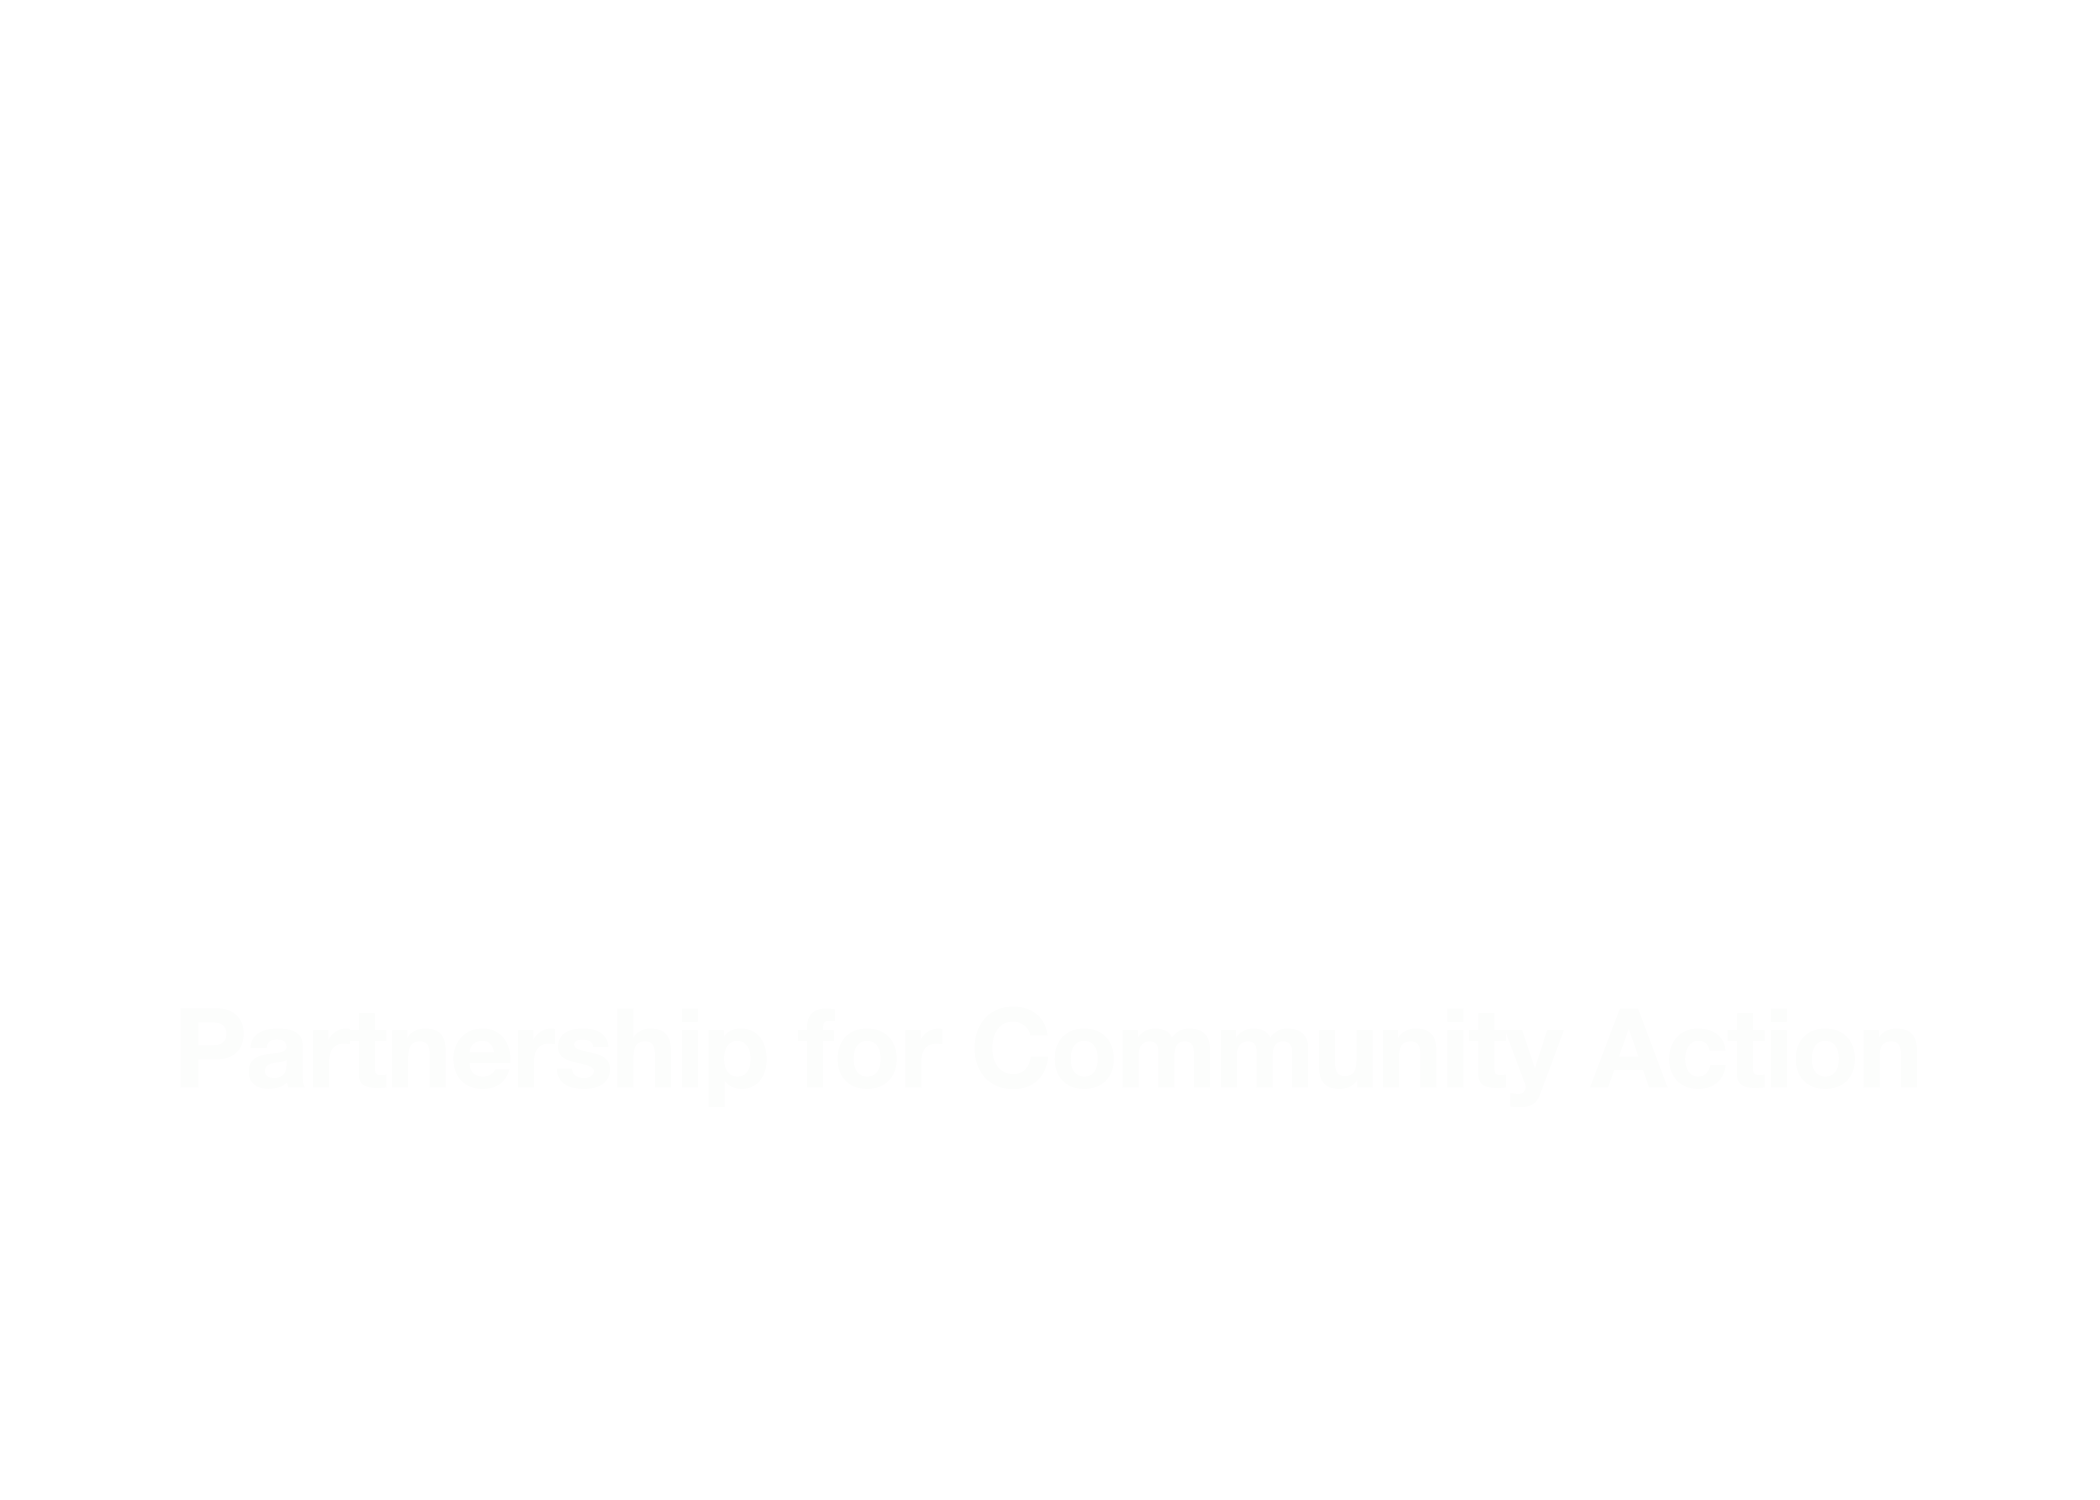 Partnership for Community Action